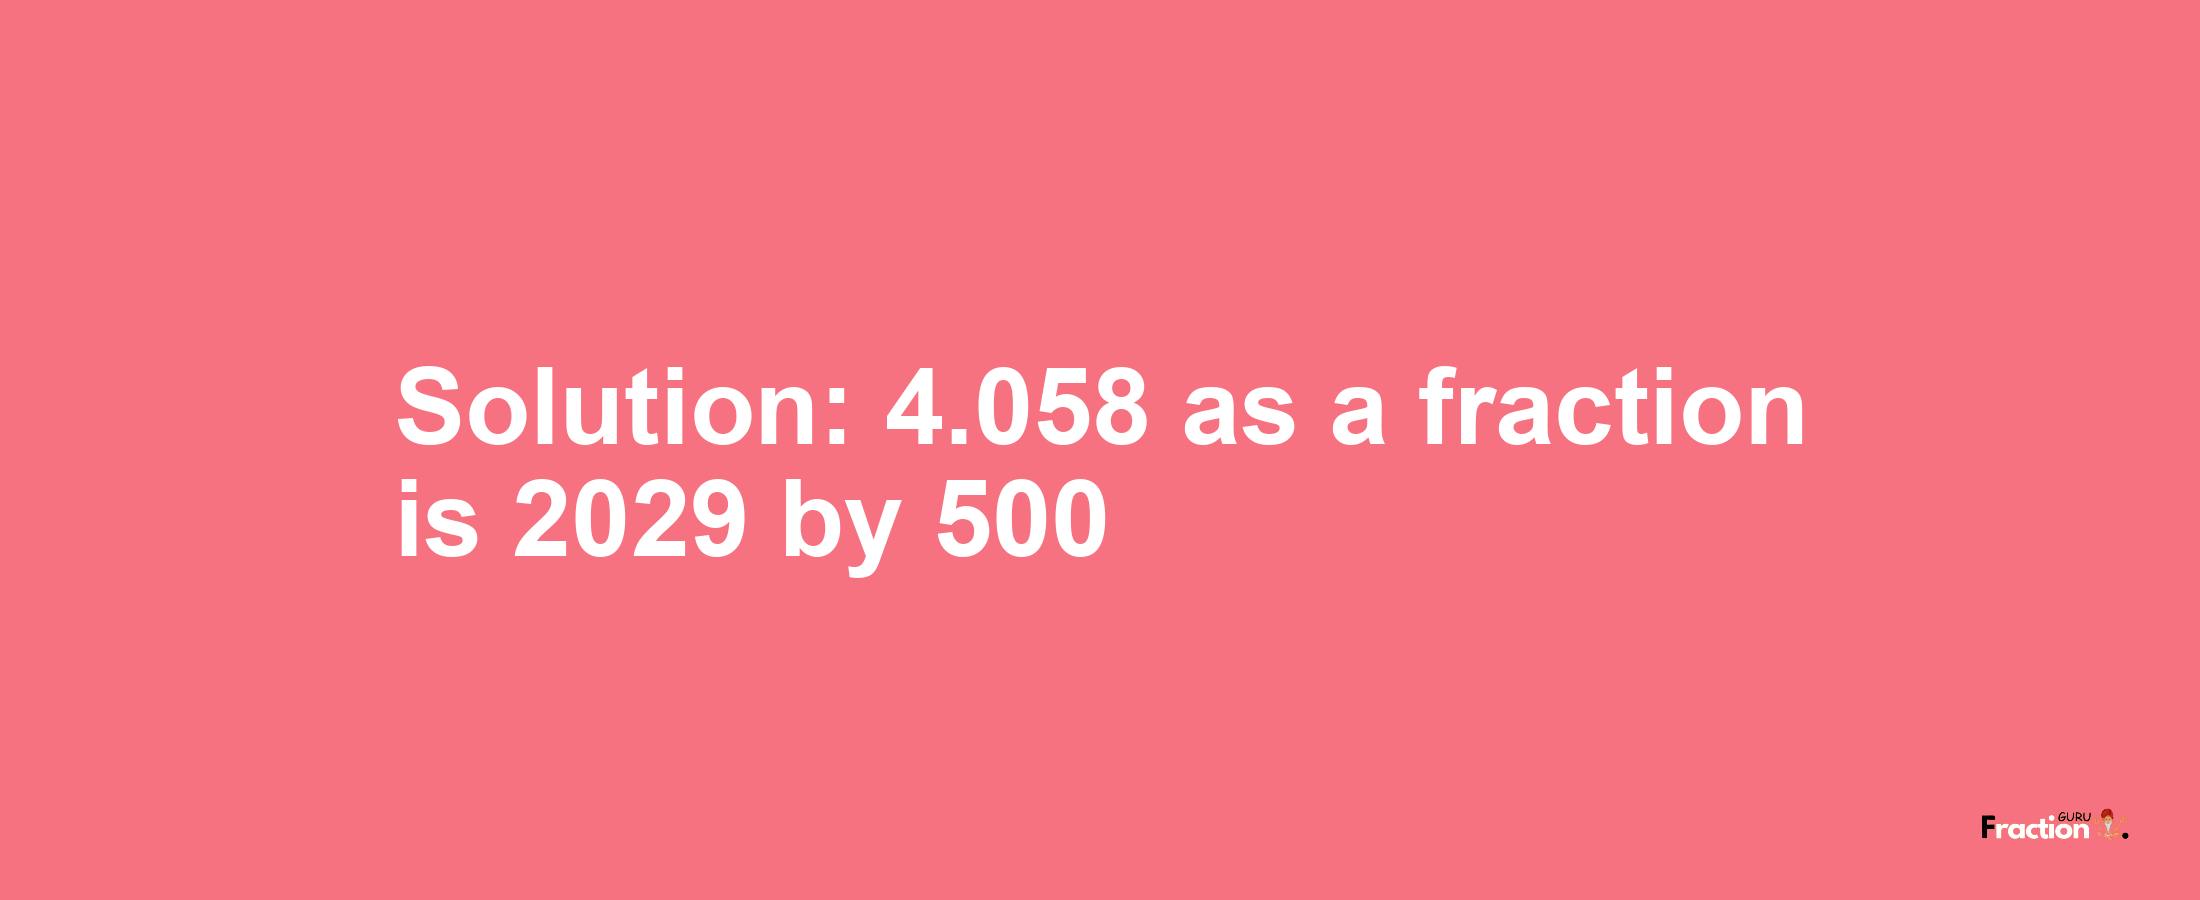 Solution:4.058 as a fraction is 2029/500